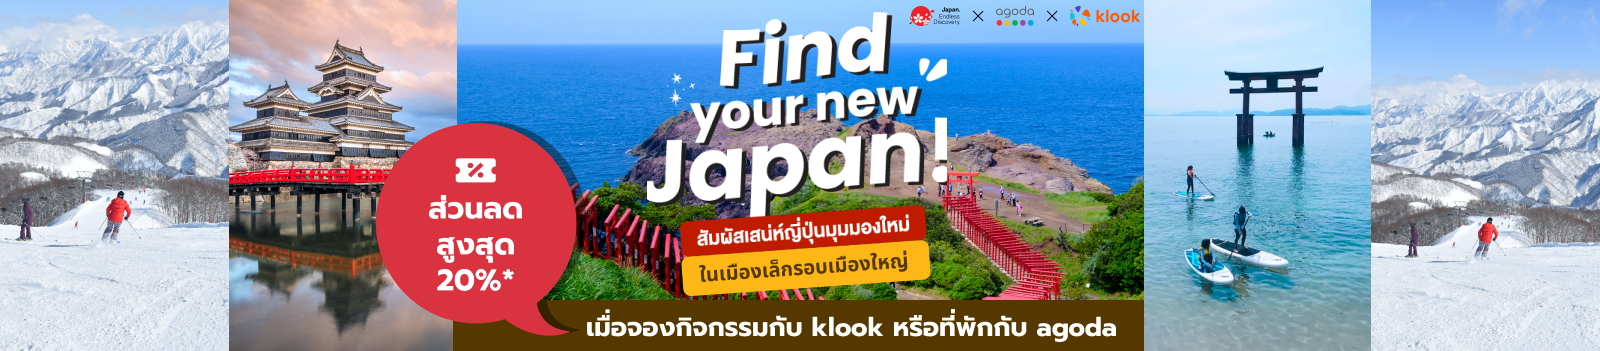 Find you new Japan